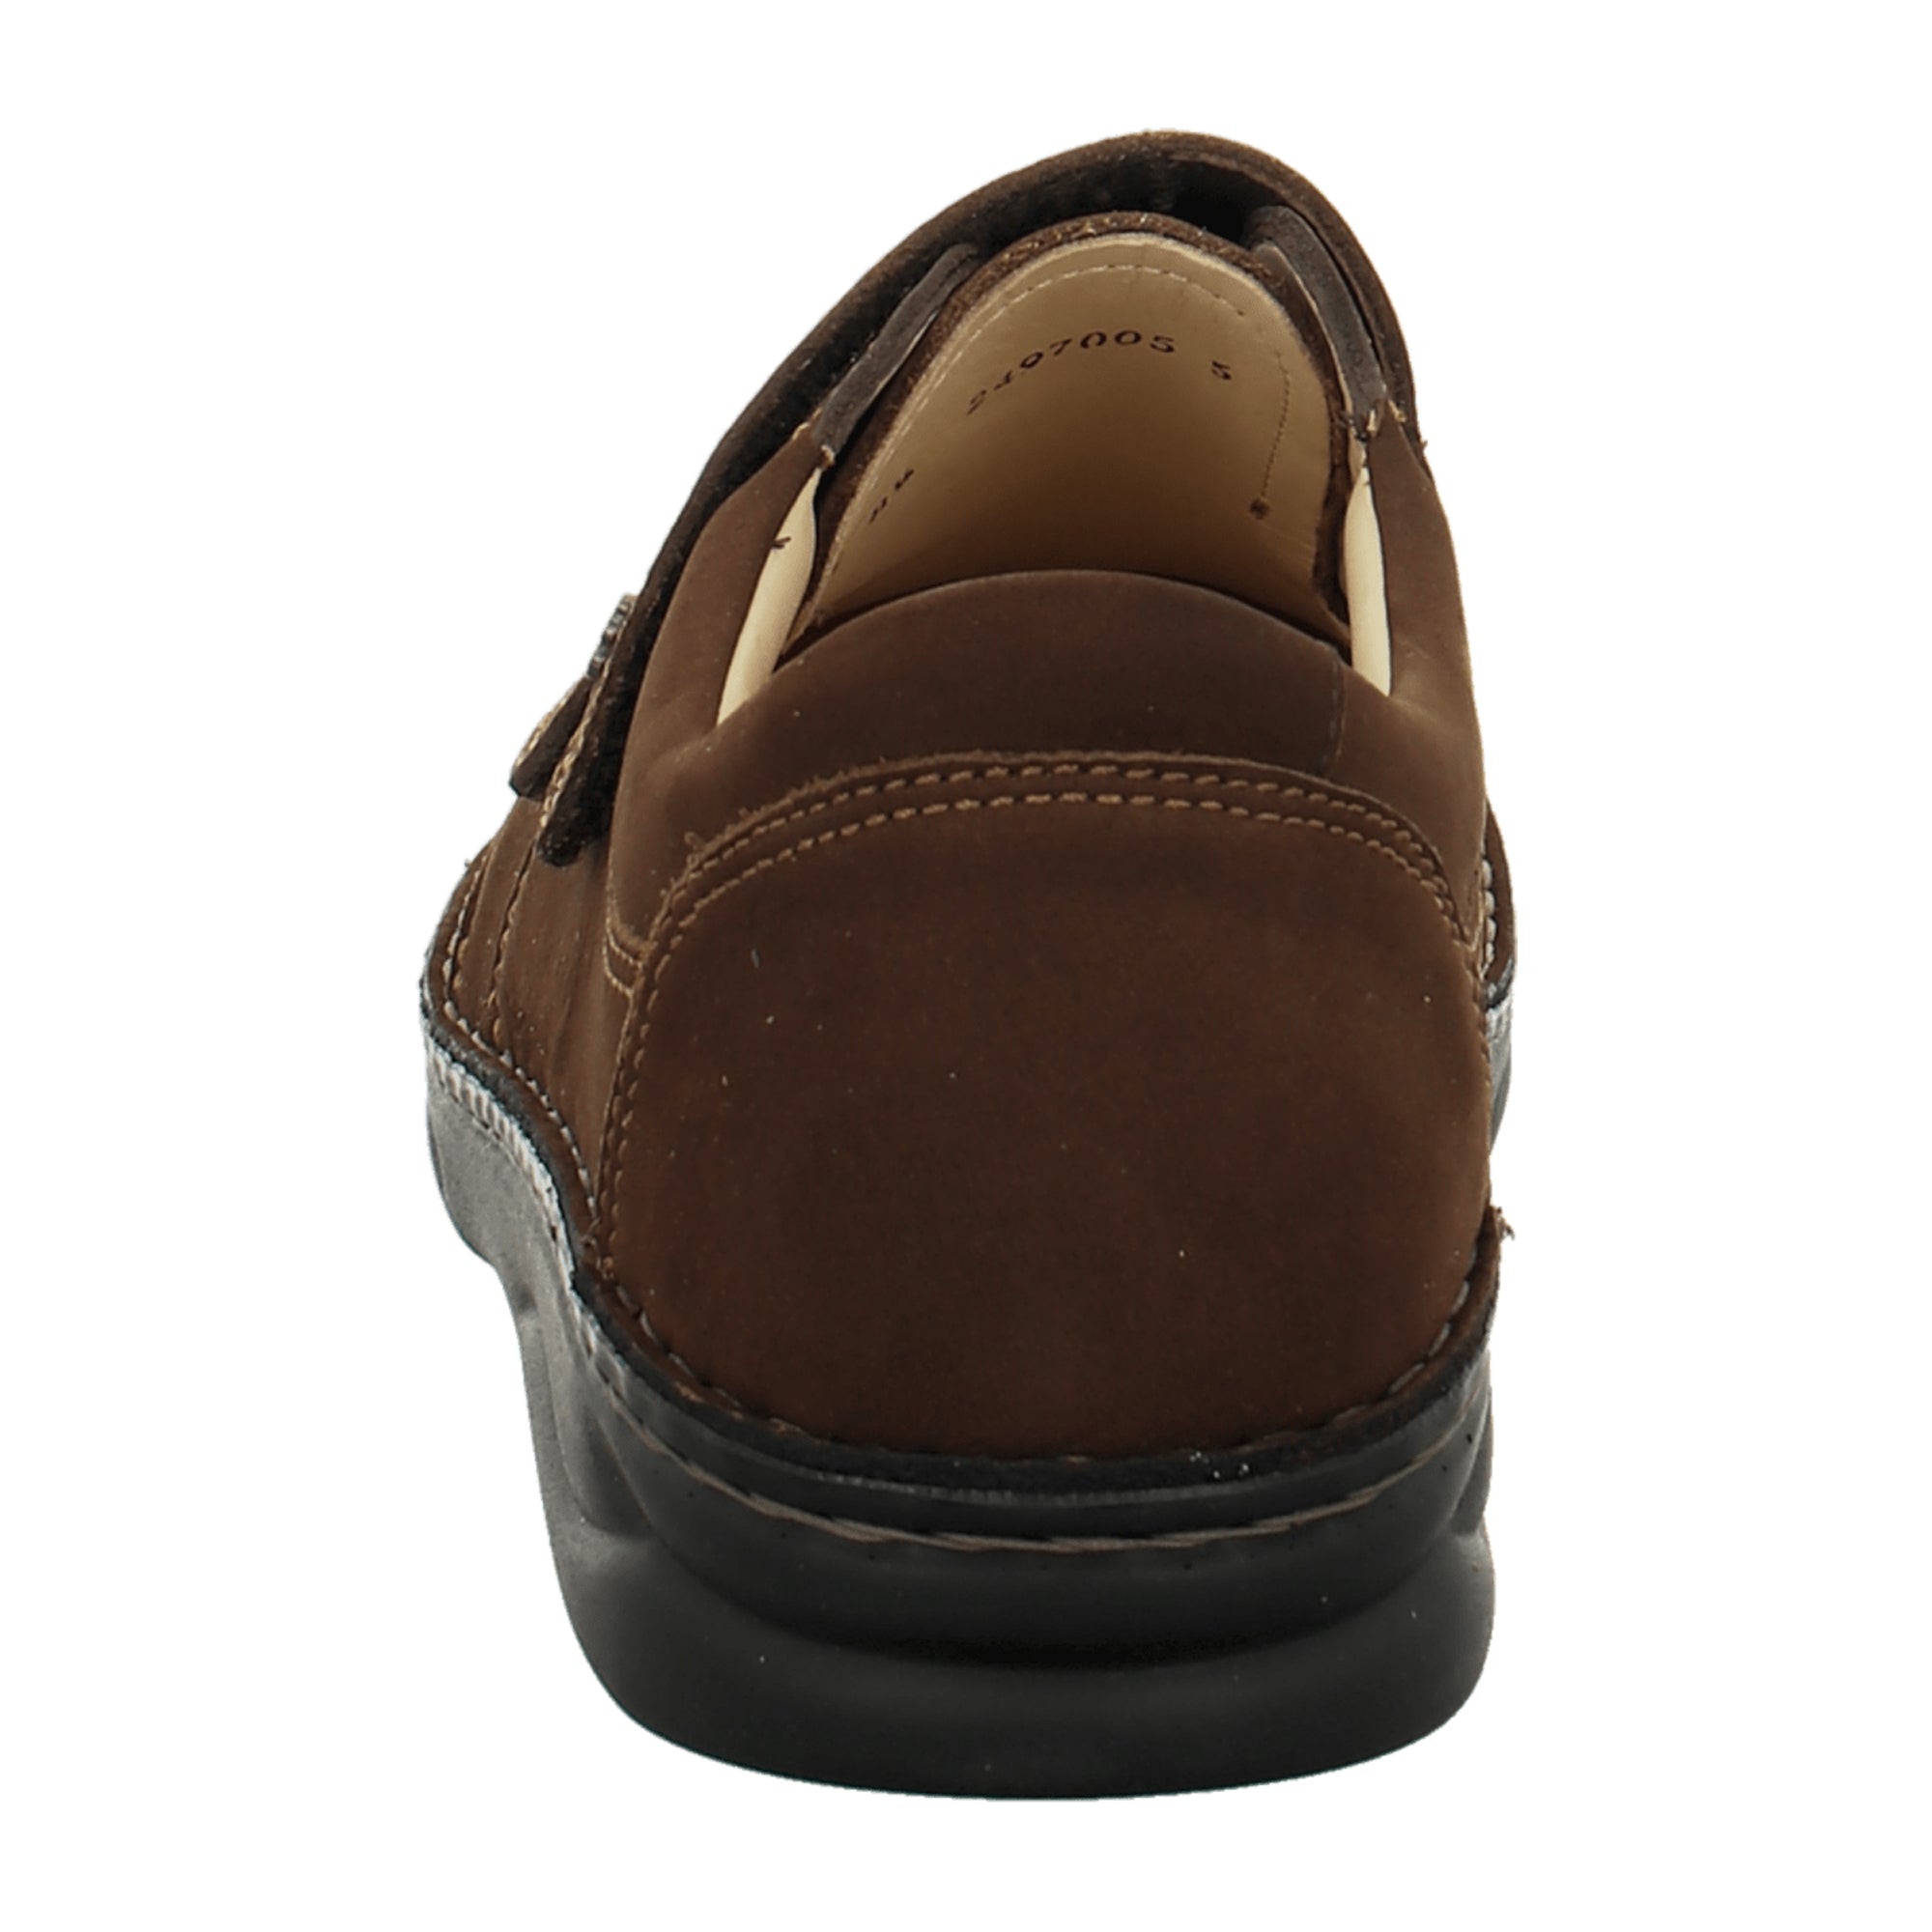 Finn Comfort Wicklow Classic Men's Shoes - Durable Leather Footwear, Brown